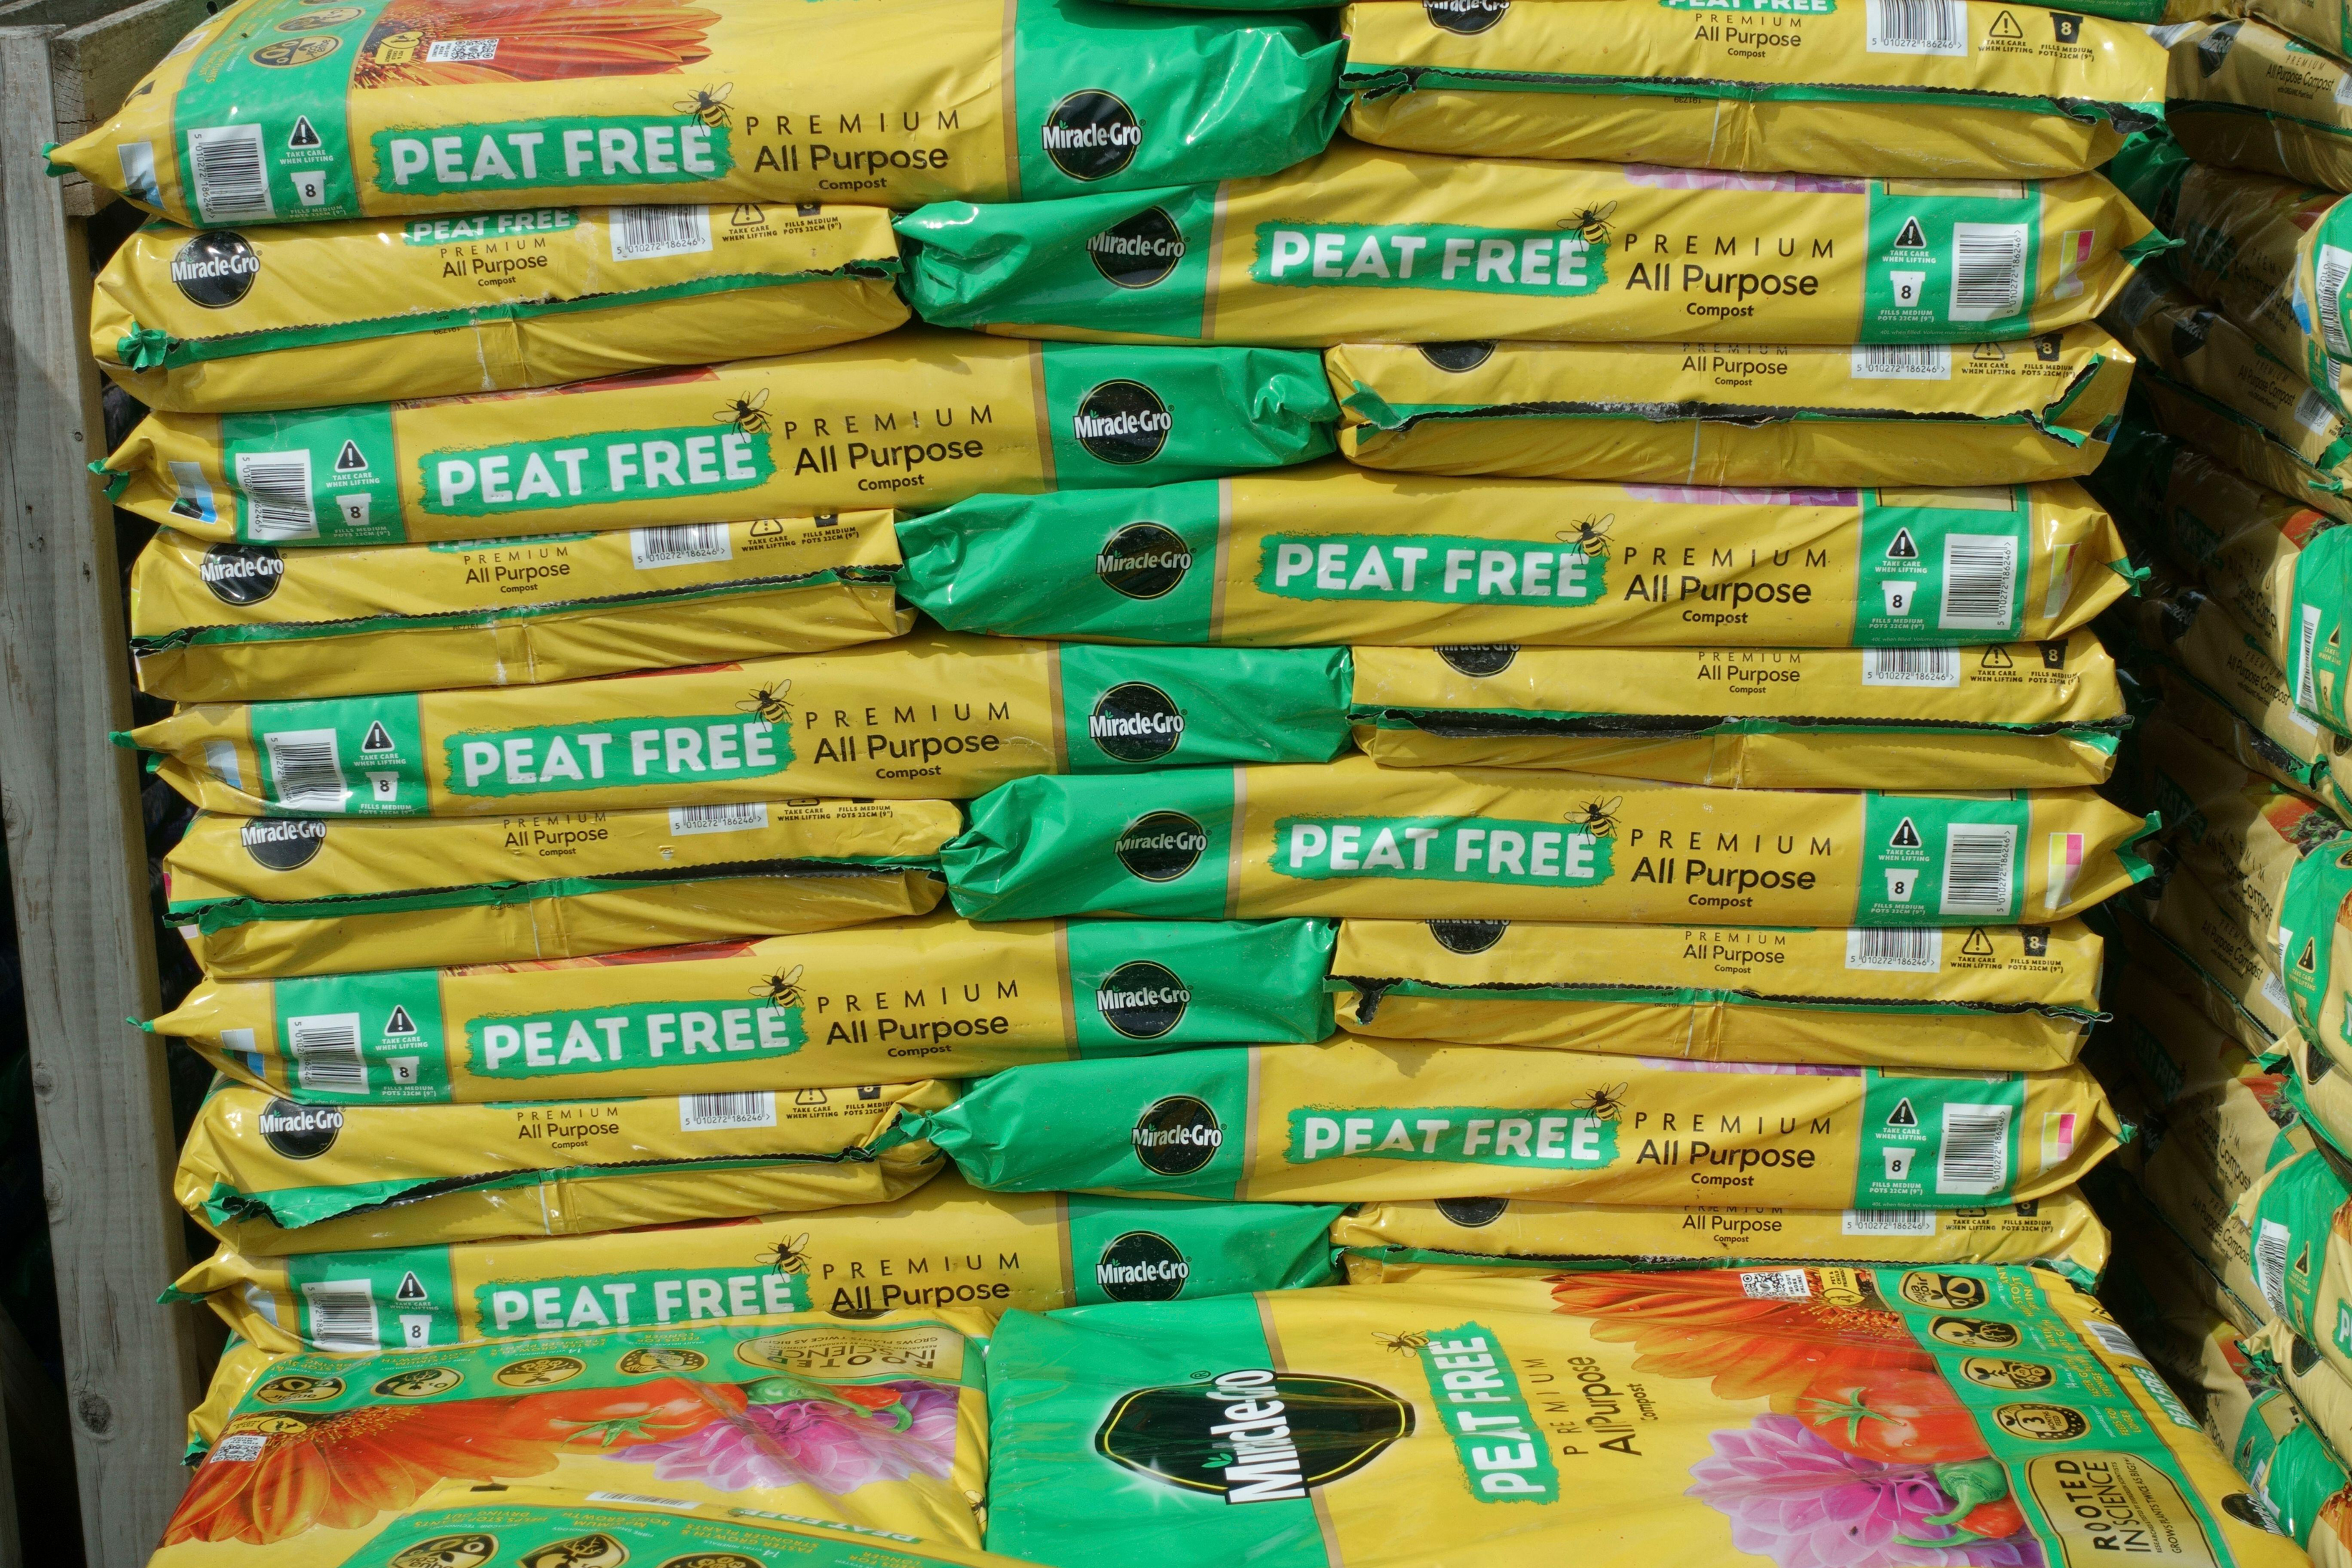 Bags of peat-free compost